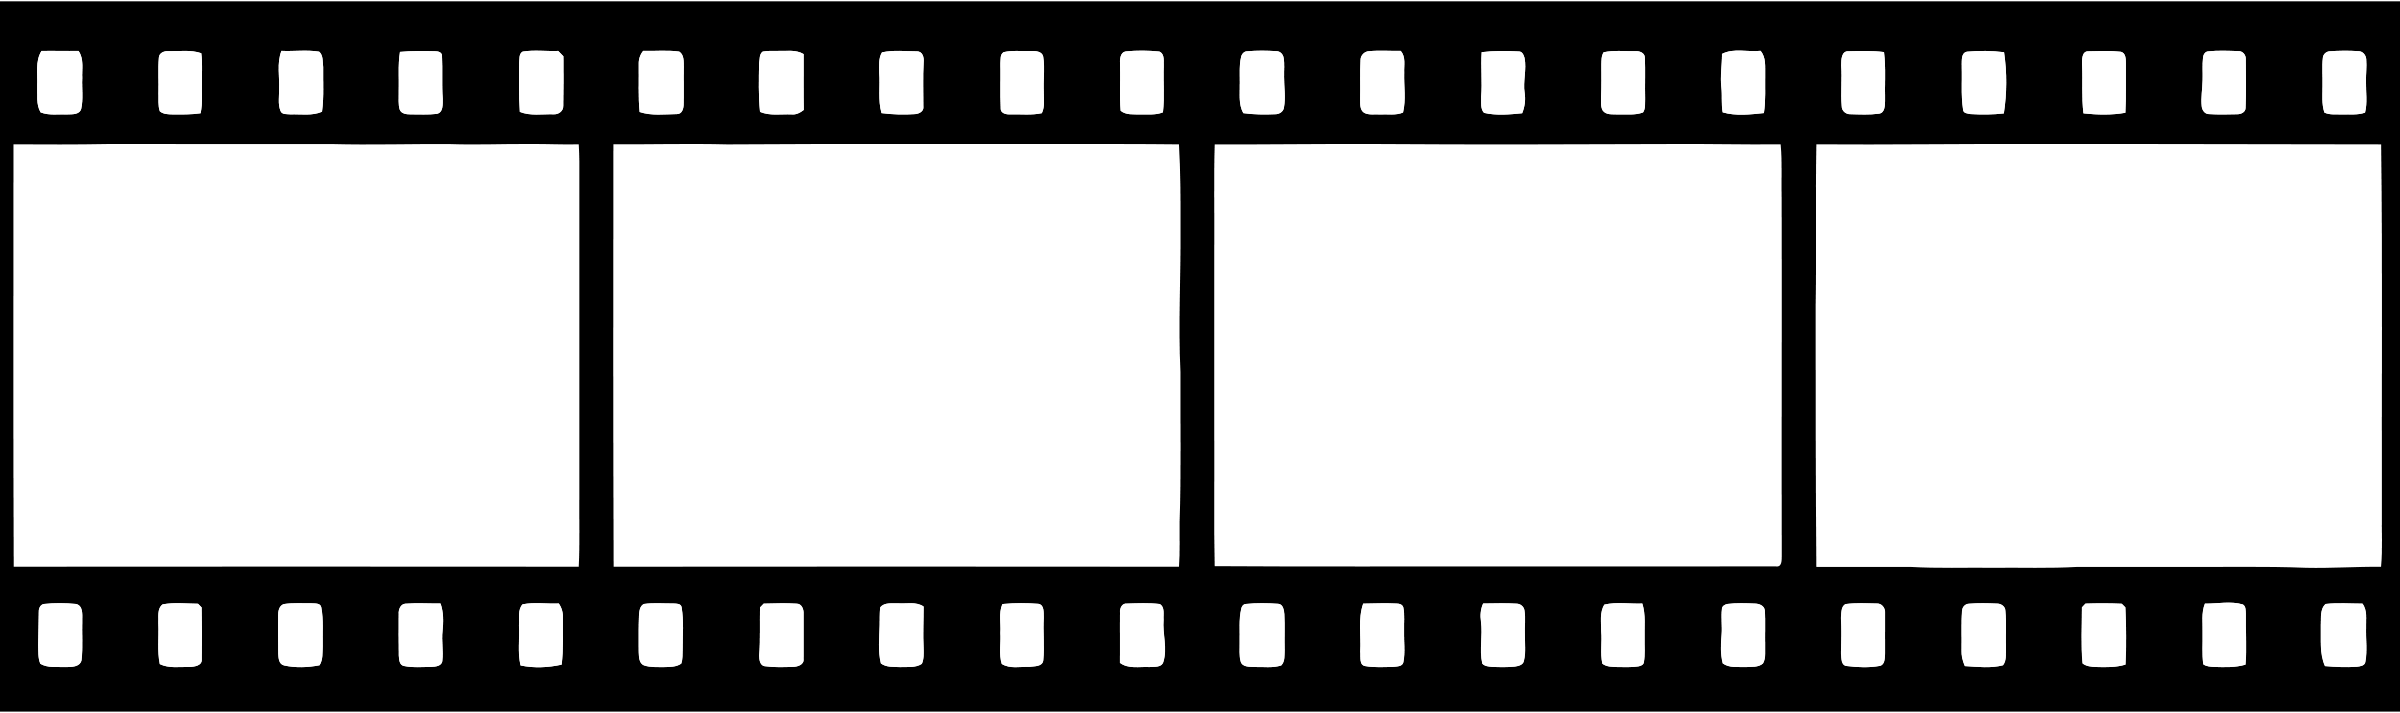 Movie Film Strip Png Image Clipart